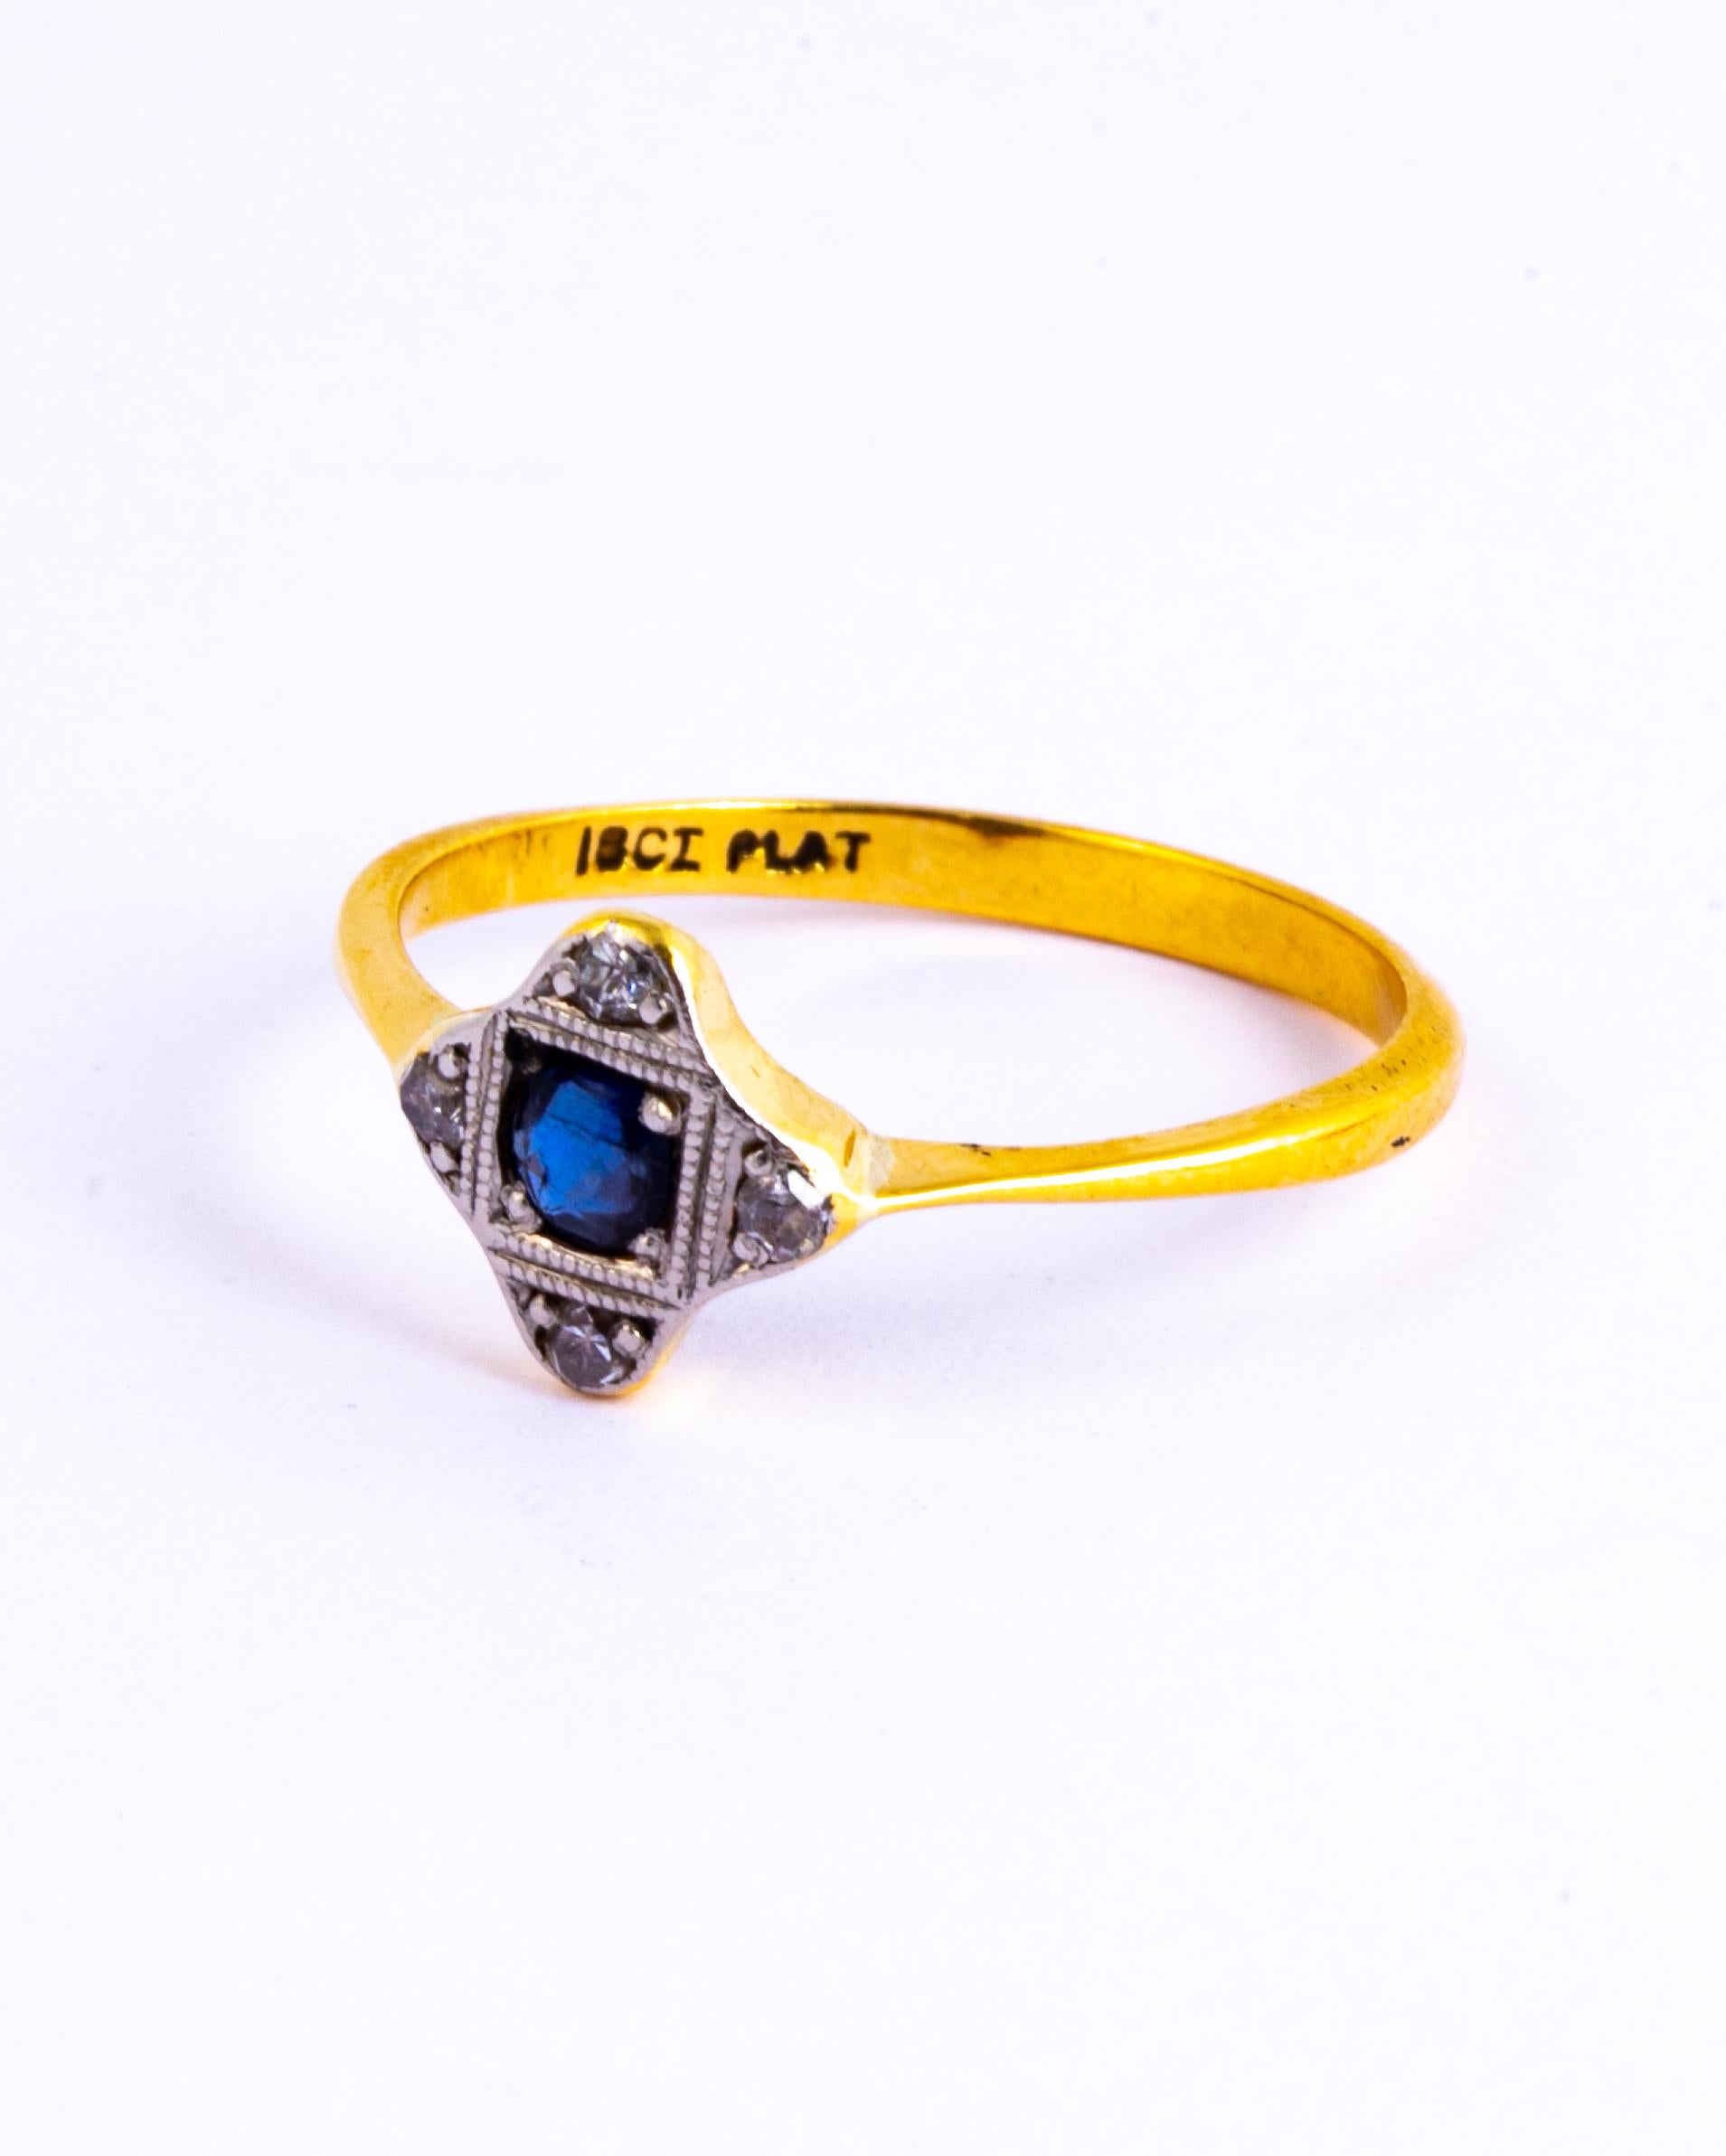 This is a wonderful example of Art Deco style, the central stone in this ring is a round cut Sapphire and surrounding it are small sparkling diamonds measuring approximately 3 pts each. The centre Sapphire measures approximately 25pts. All stones